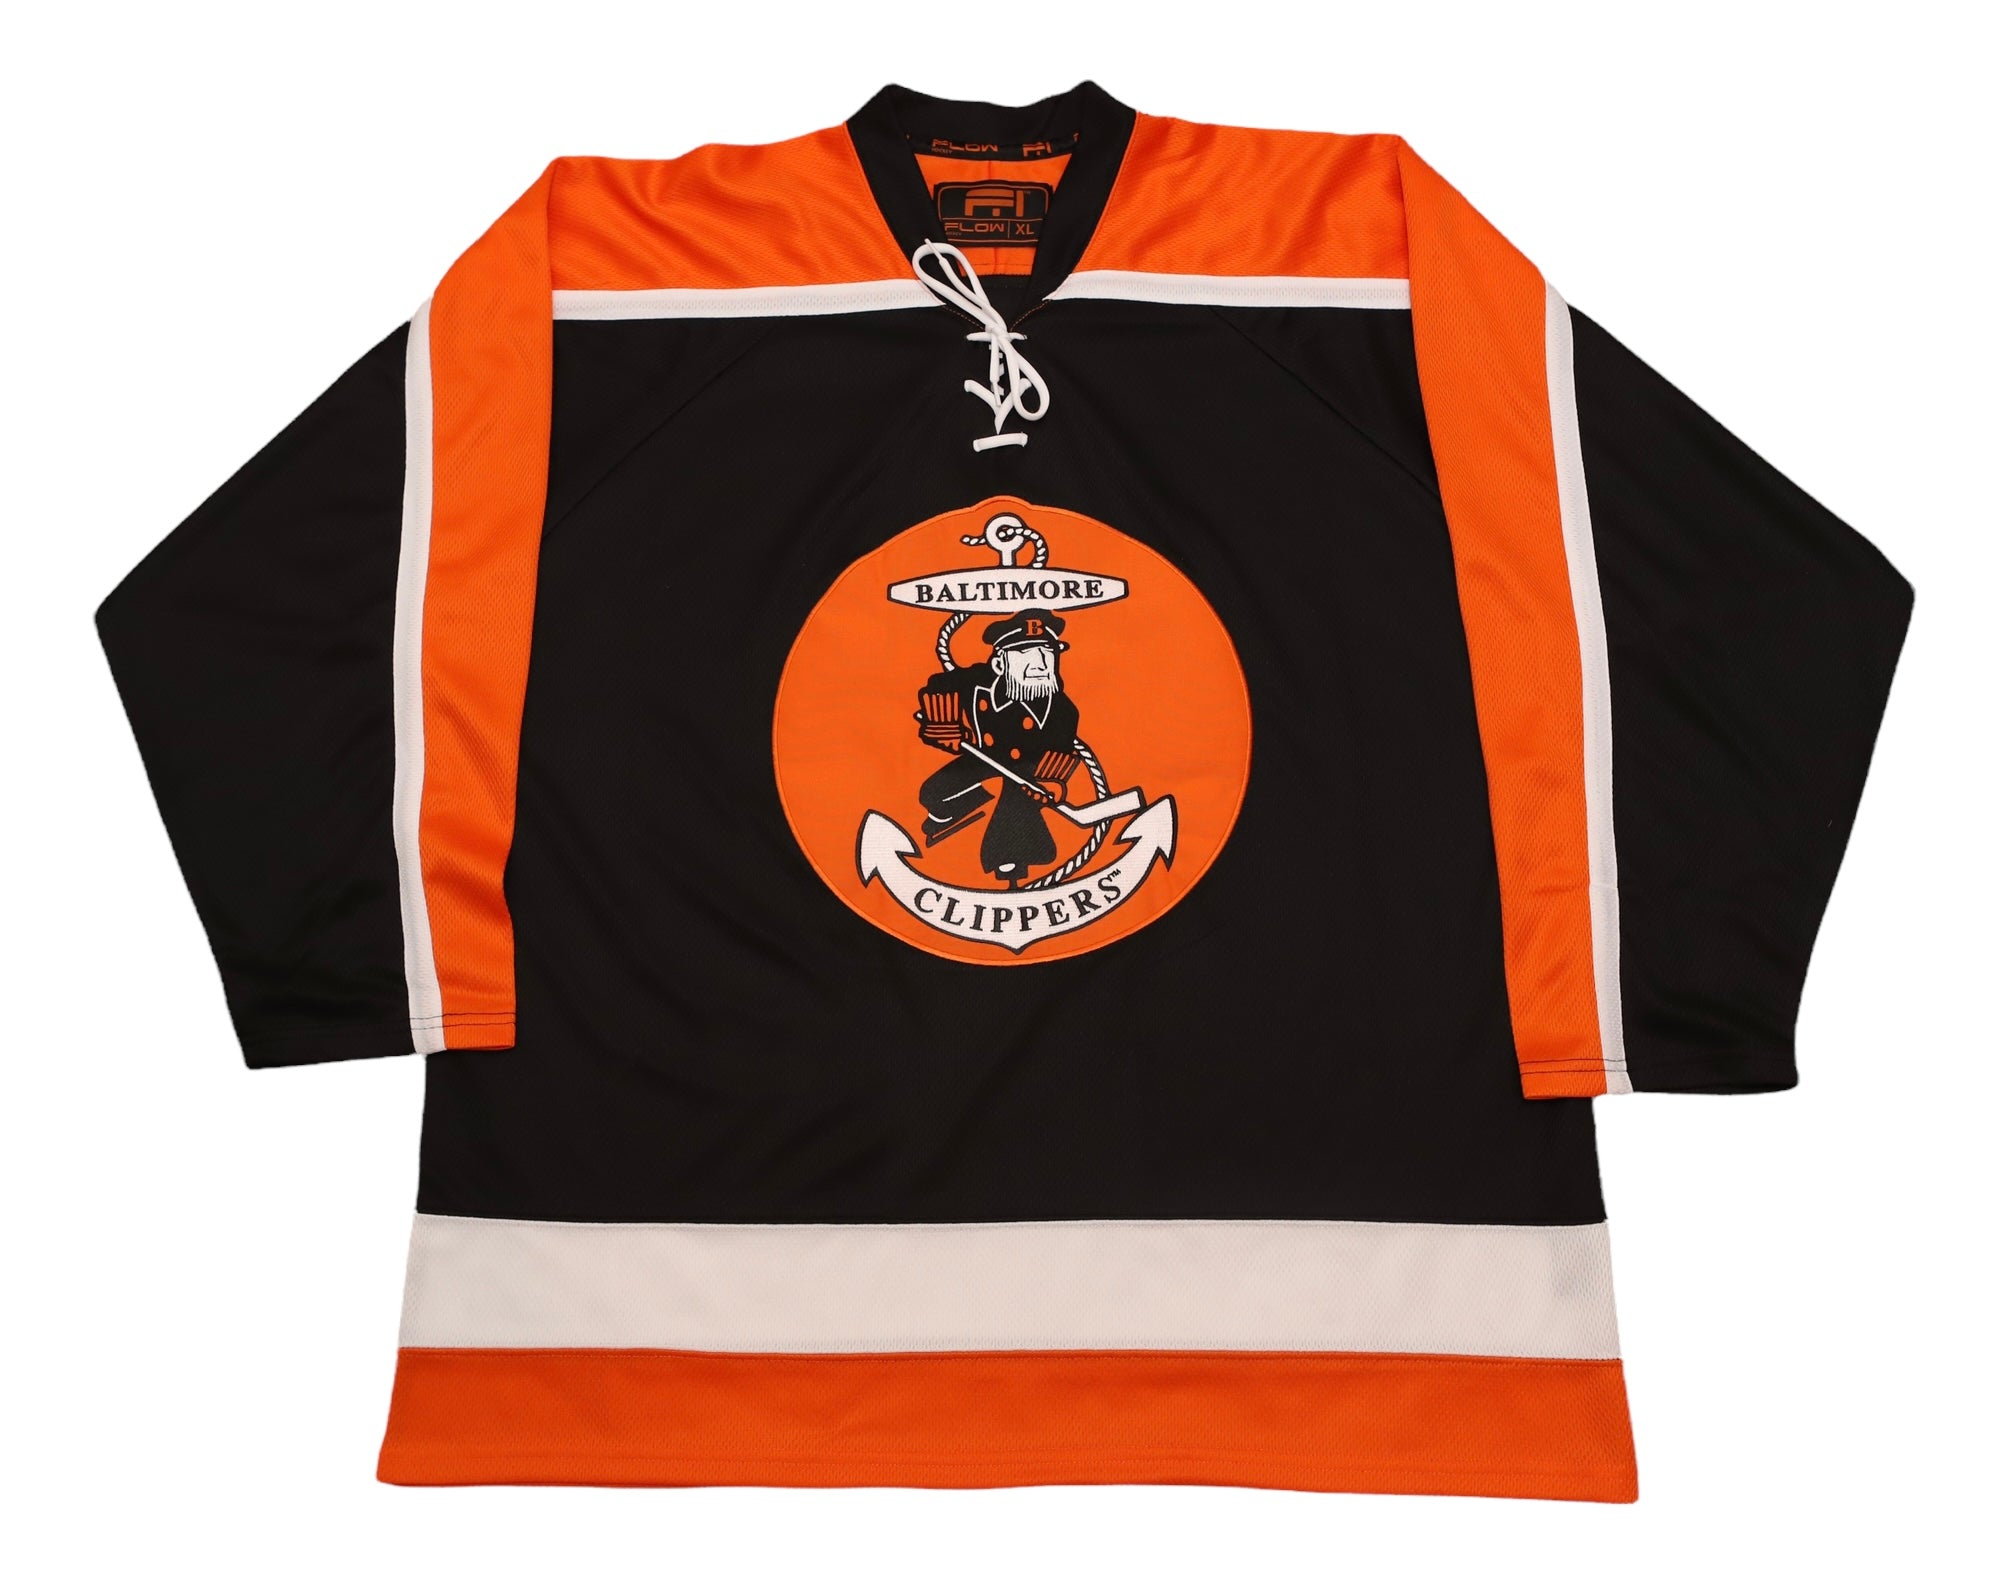 Baltimore Clippers® 1960s Black Jersey (BLANK) – Vintage Ice Hockey